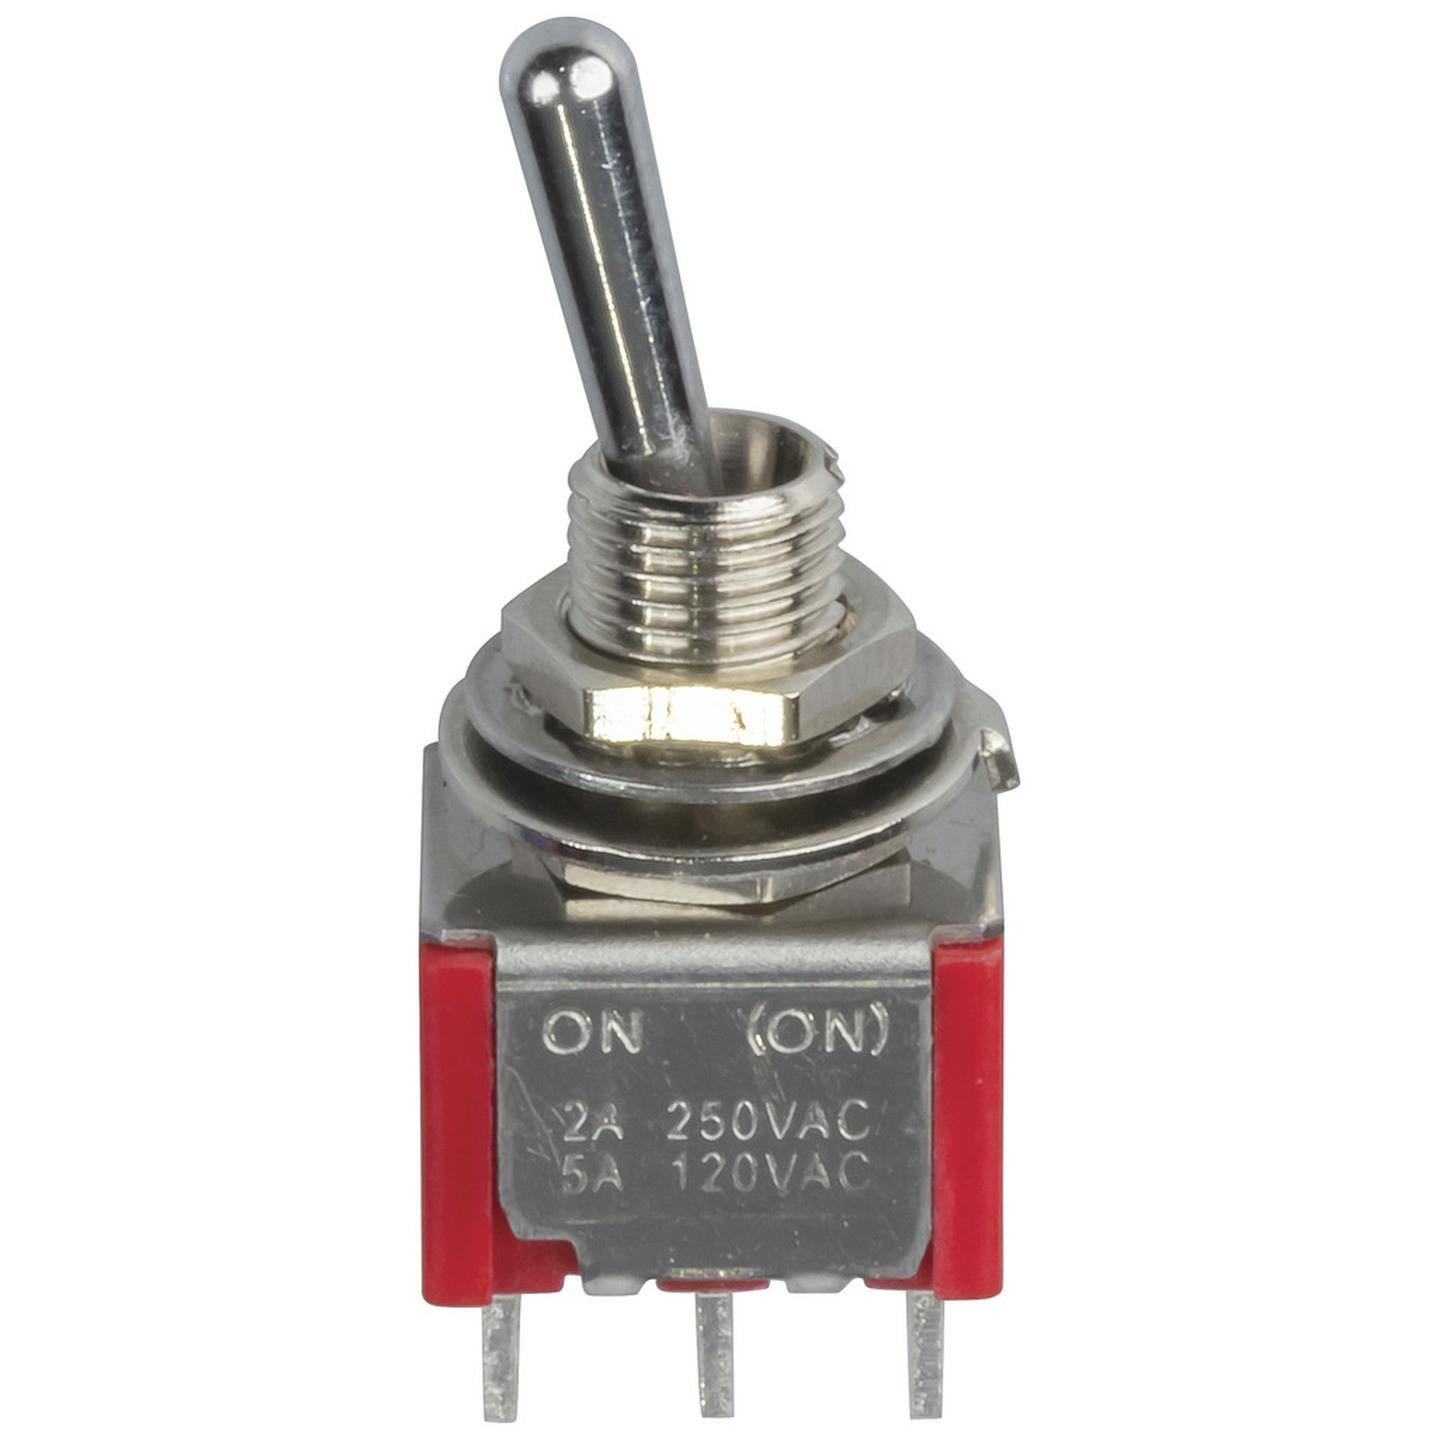 DPDT Miniature Toggle Switch - Solder Tag - on - none - mom